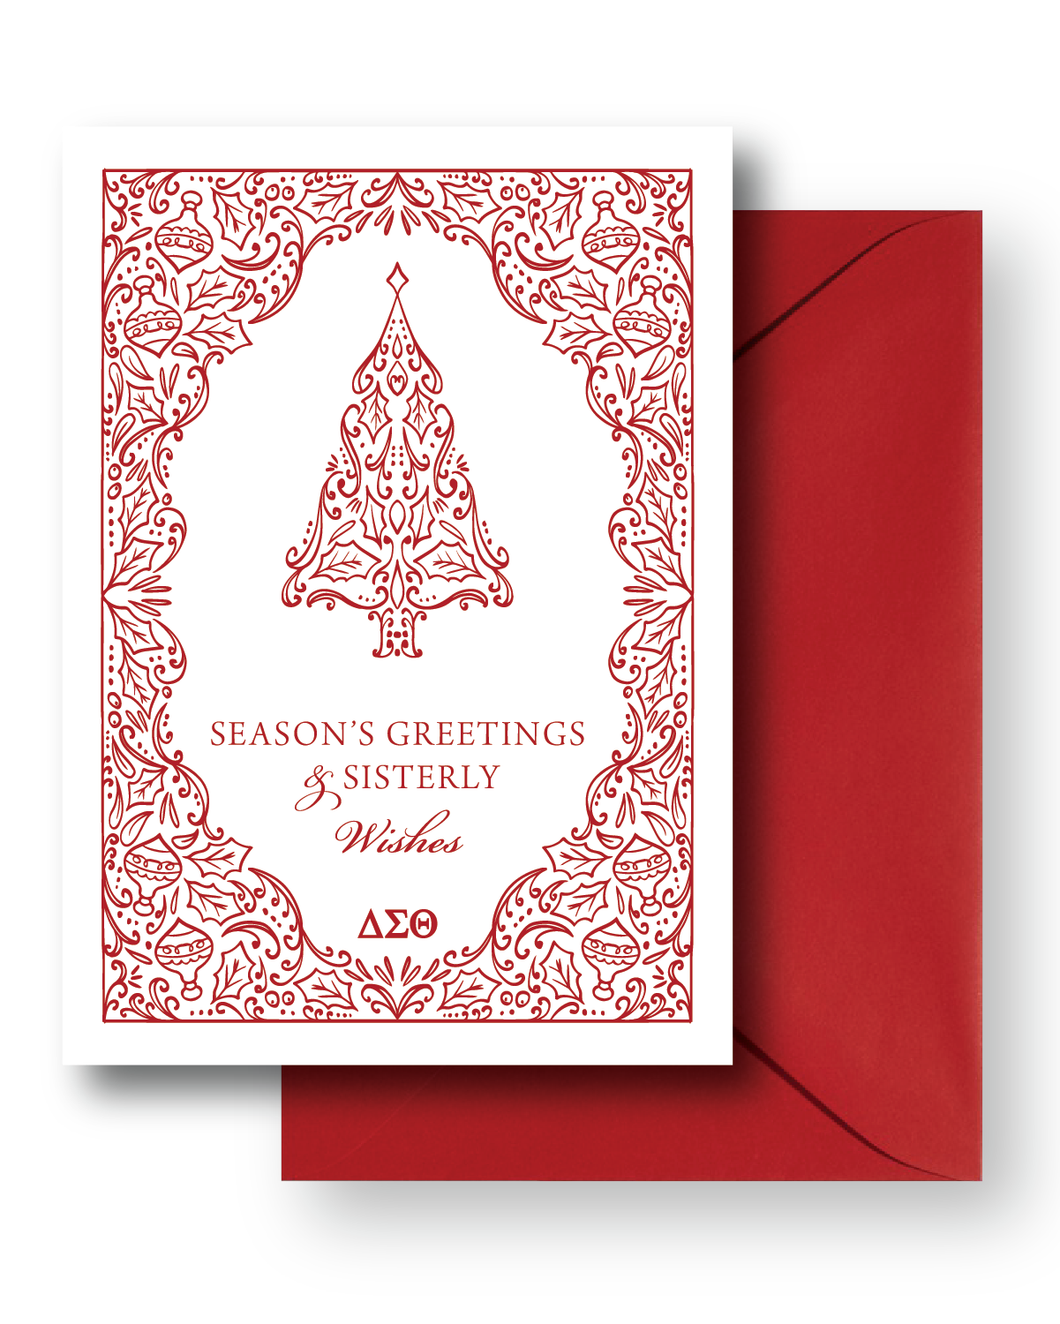 DST Sisterly Wishes Holiday Greeting Card Pack